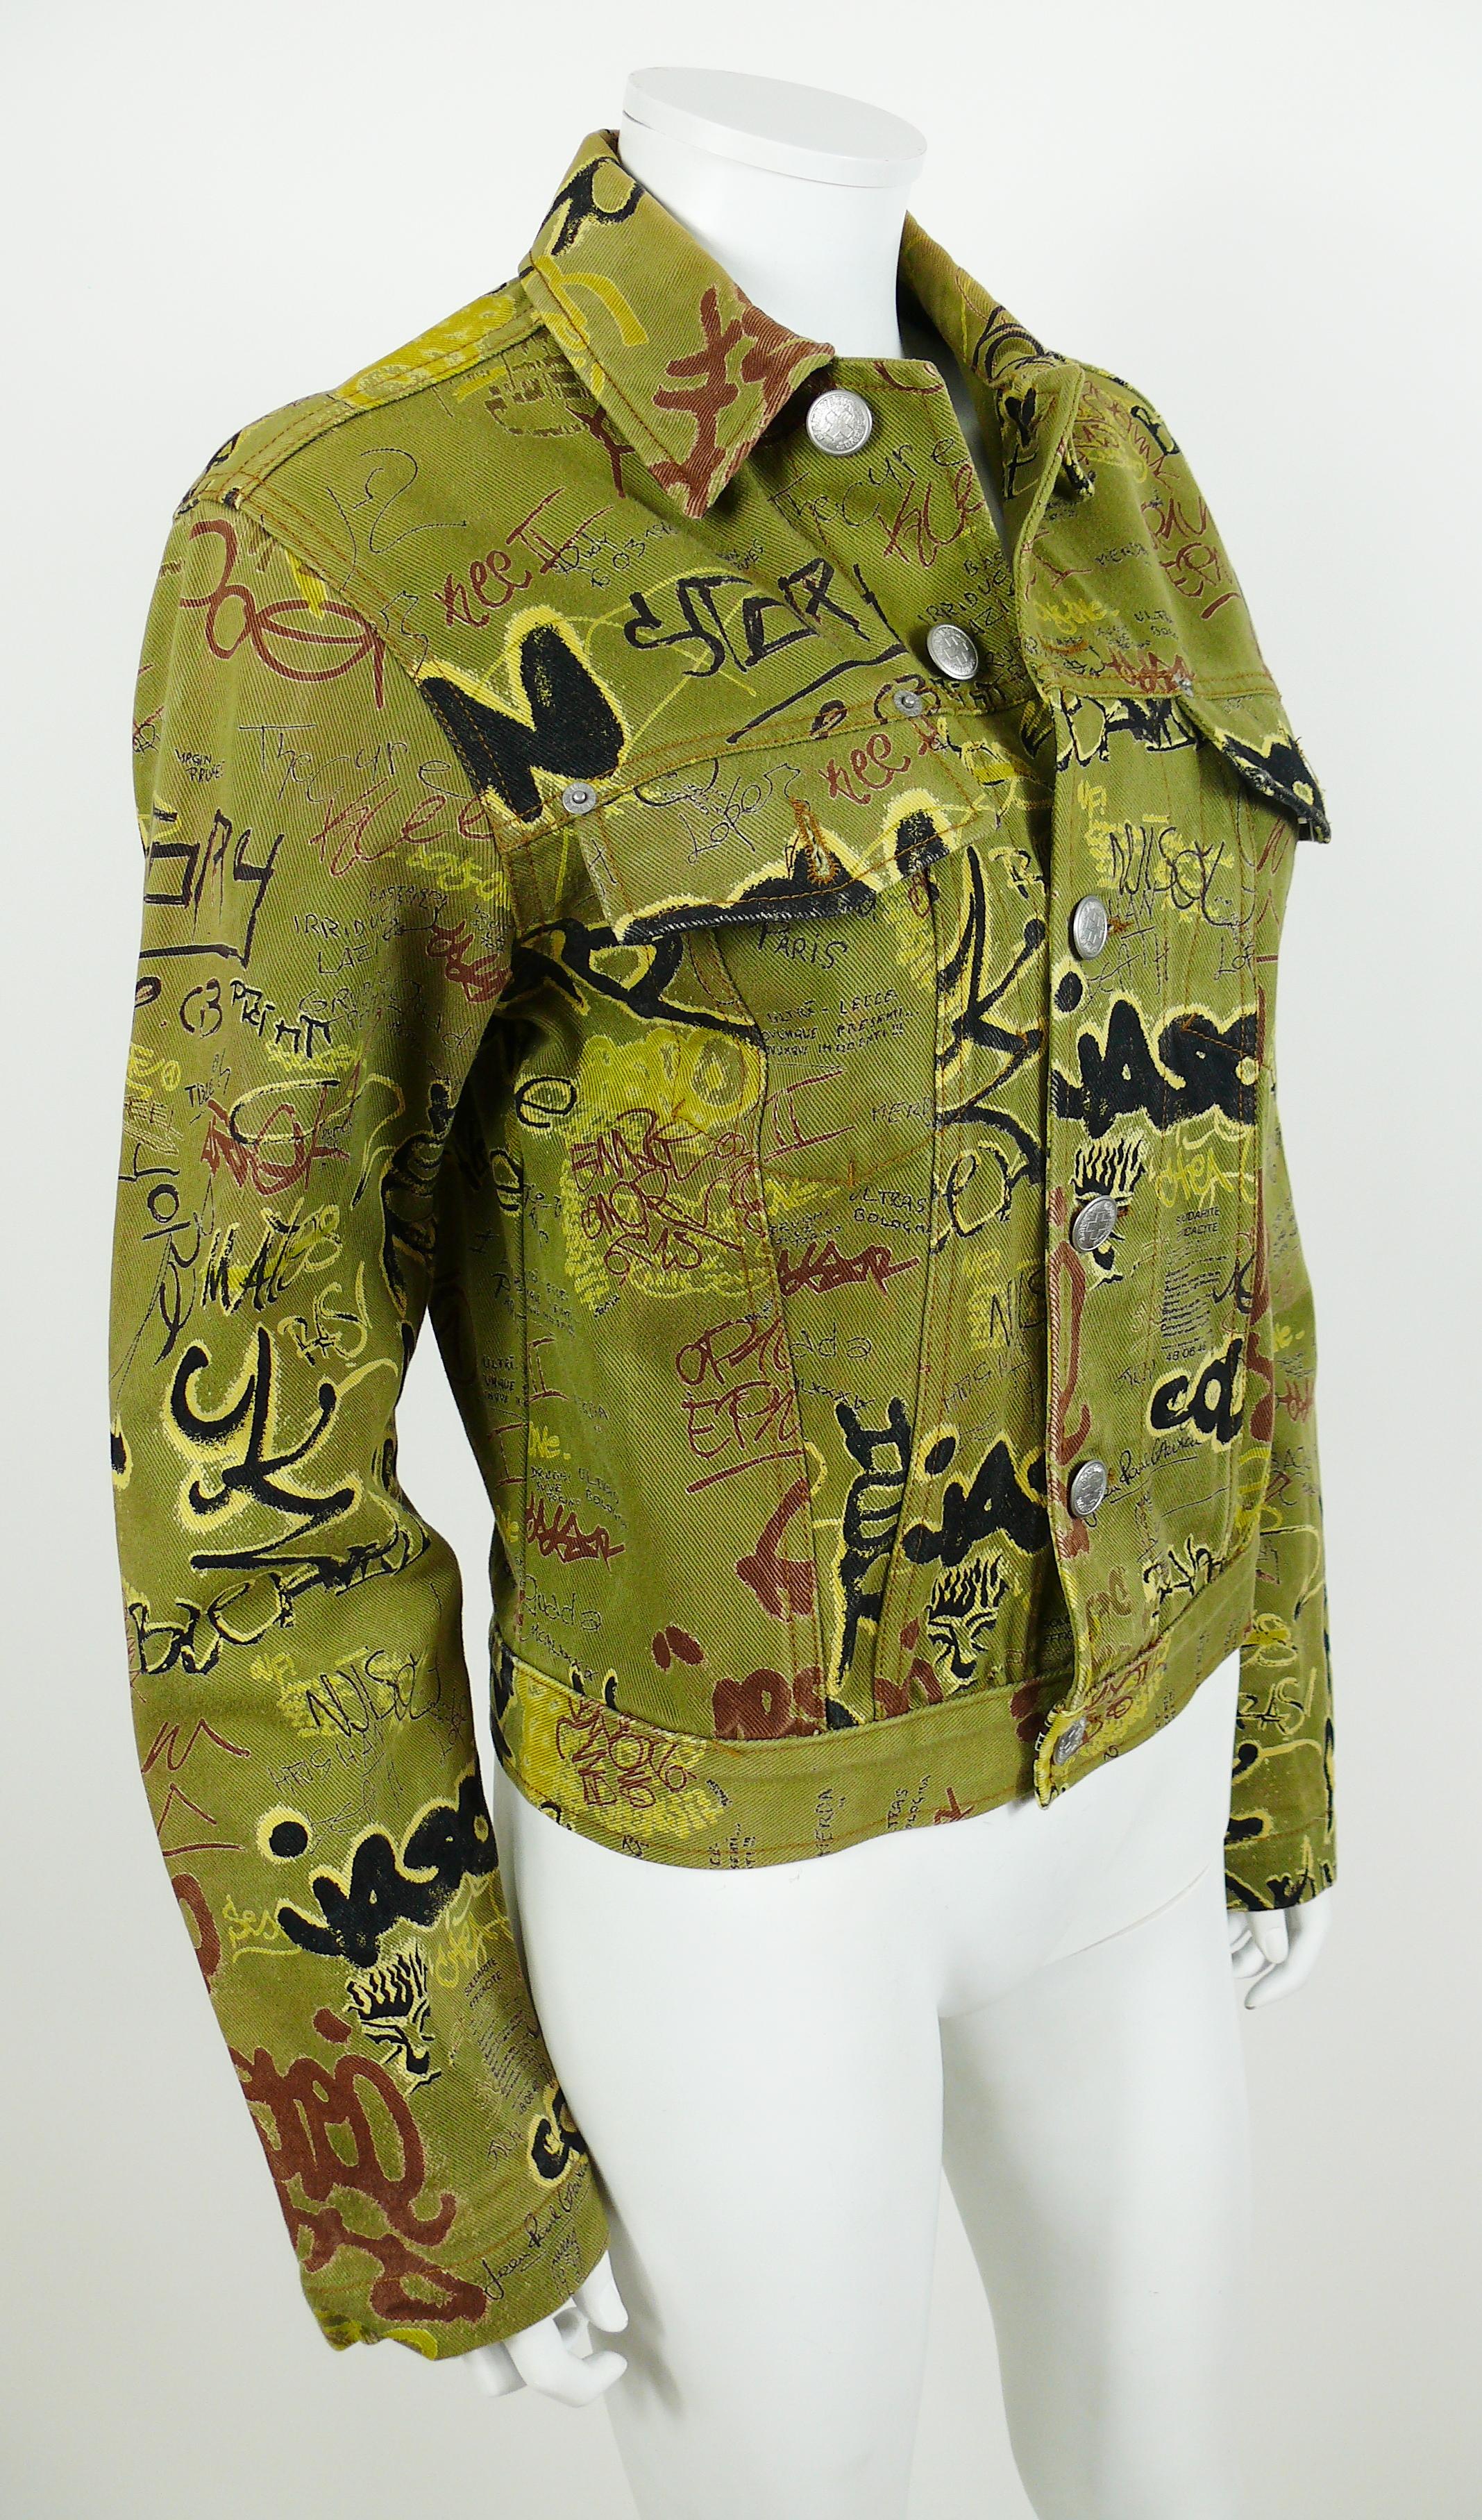 JEAN PAUL GAULTIER vintage khaki denim jacket featuring a multi colored graffiti print all over.

This jacket features :
- Classic collar.
- Two chest pockets with buttons (shown on photo 4).
- Front and cuff buttoning.
- Silver toned GAULTIER